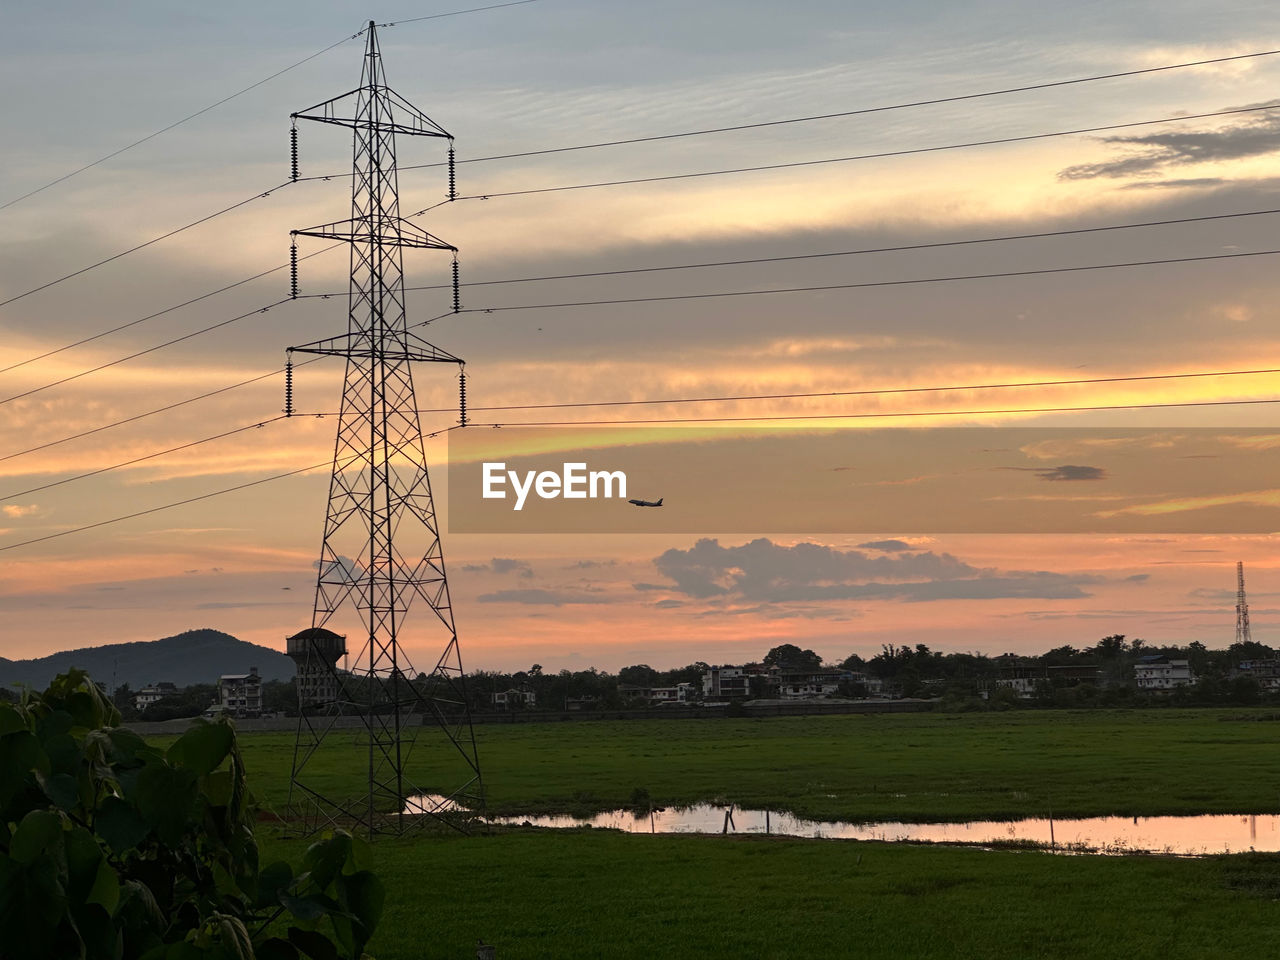 electricity, technology, cable, sky, electricity pylon, power supply, power generation, sunset, environment, power line, landscape, nature, cloud, transmission tower, overhead power line, plant, land, no people, silhouette, architecture, tower, agriculture, built structure, field, scenics - nature, grass, orange color, beauty in nature, rural scene, outdoors, electrical supply, dramatic sky, horizon, outdoor structure, dusk, business finance and industry, environmental conservation, outdoor power equipment, twilight, tranquility, wind, power cable, industry, in a row, power station, romantic sky, high voltage sign, non-urban scene, sun